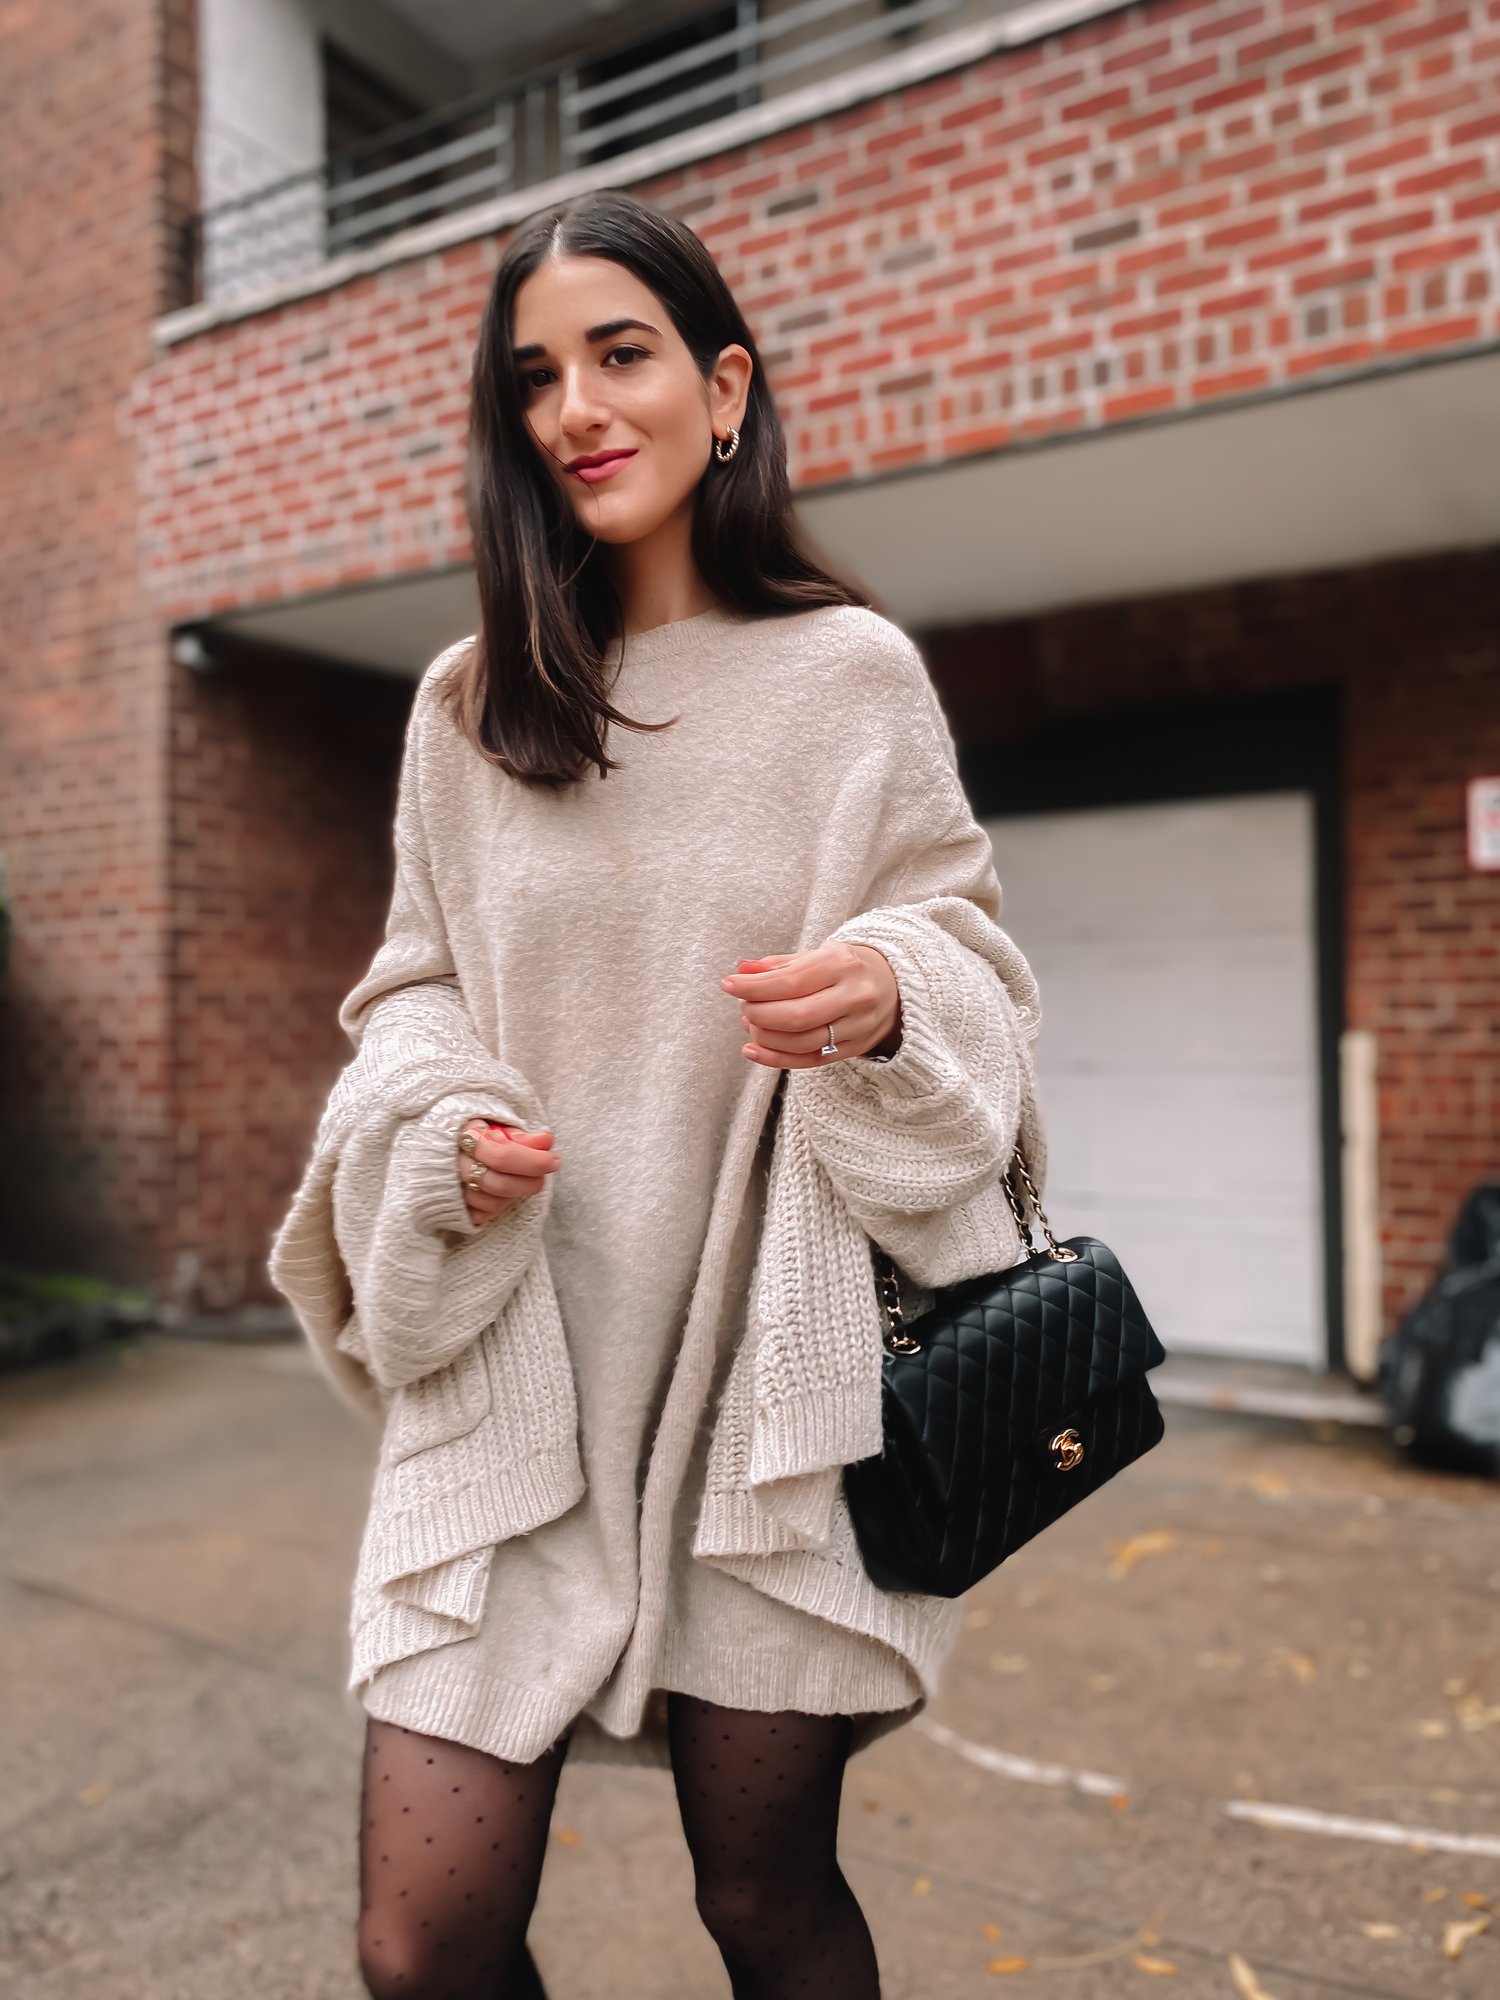 My Thoughts On, It Gets Easier. // Layered Sweaters + Polka Dot